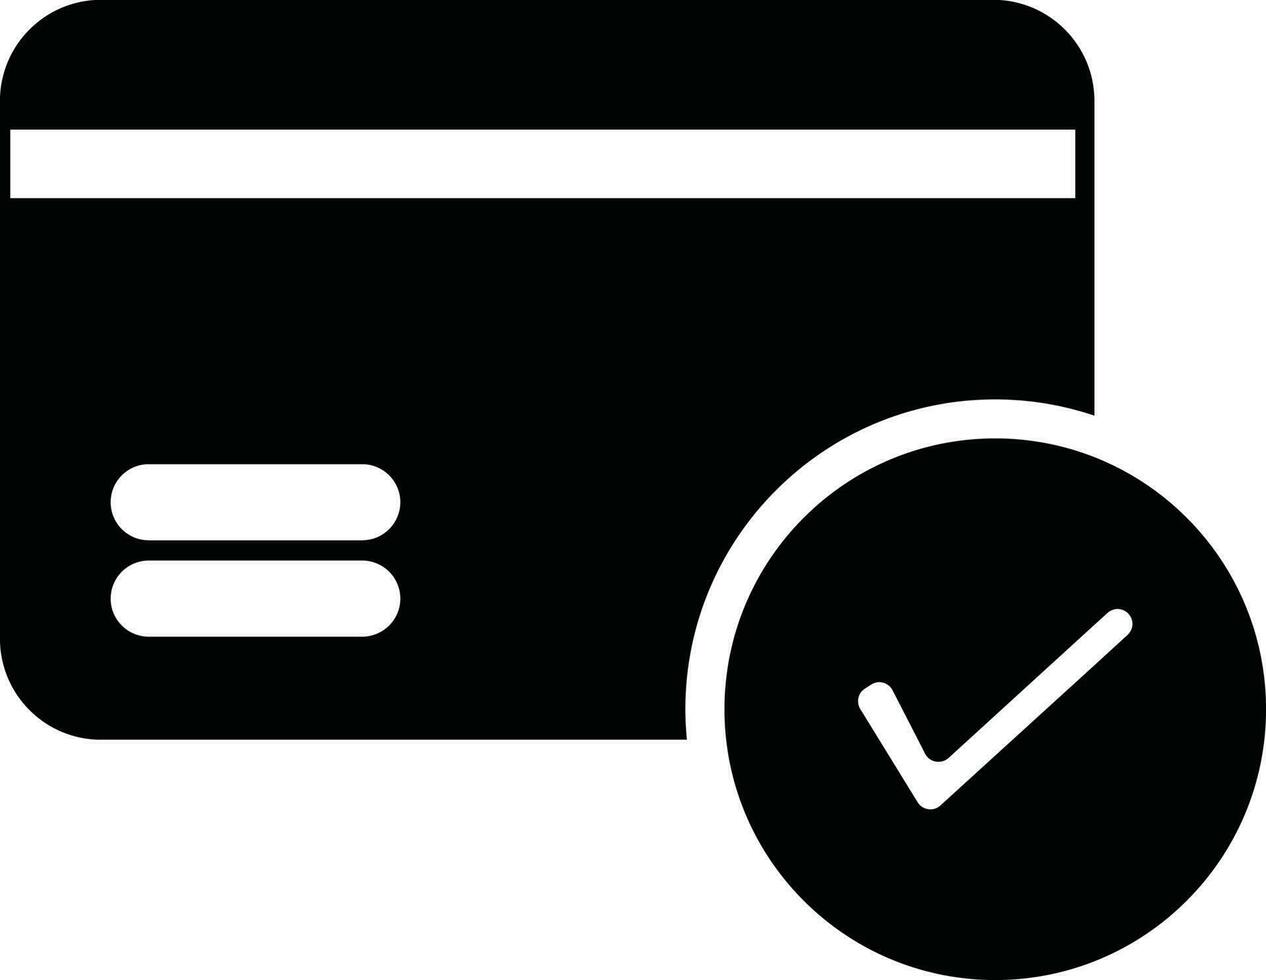 Check or Verified Payment Card glyph icon. vector